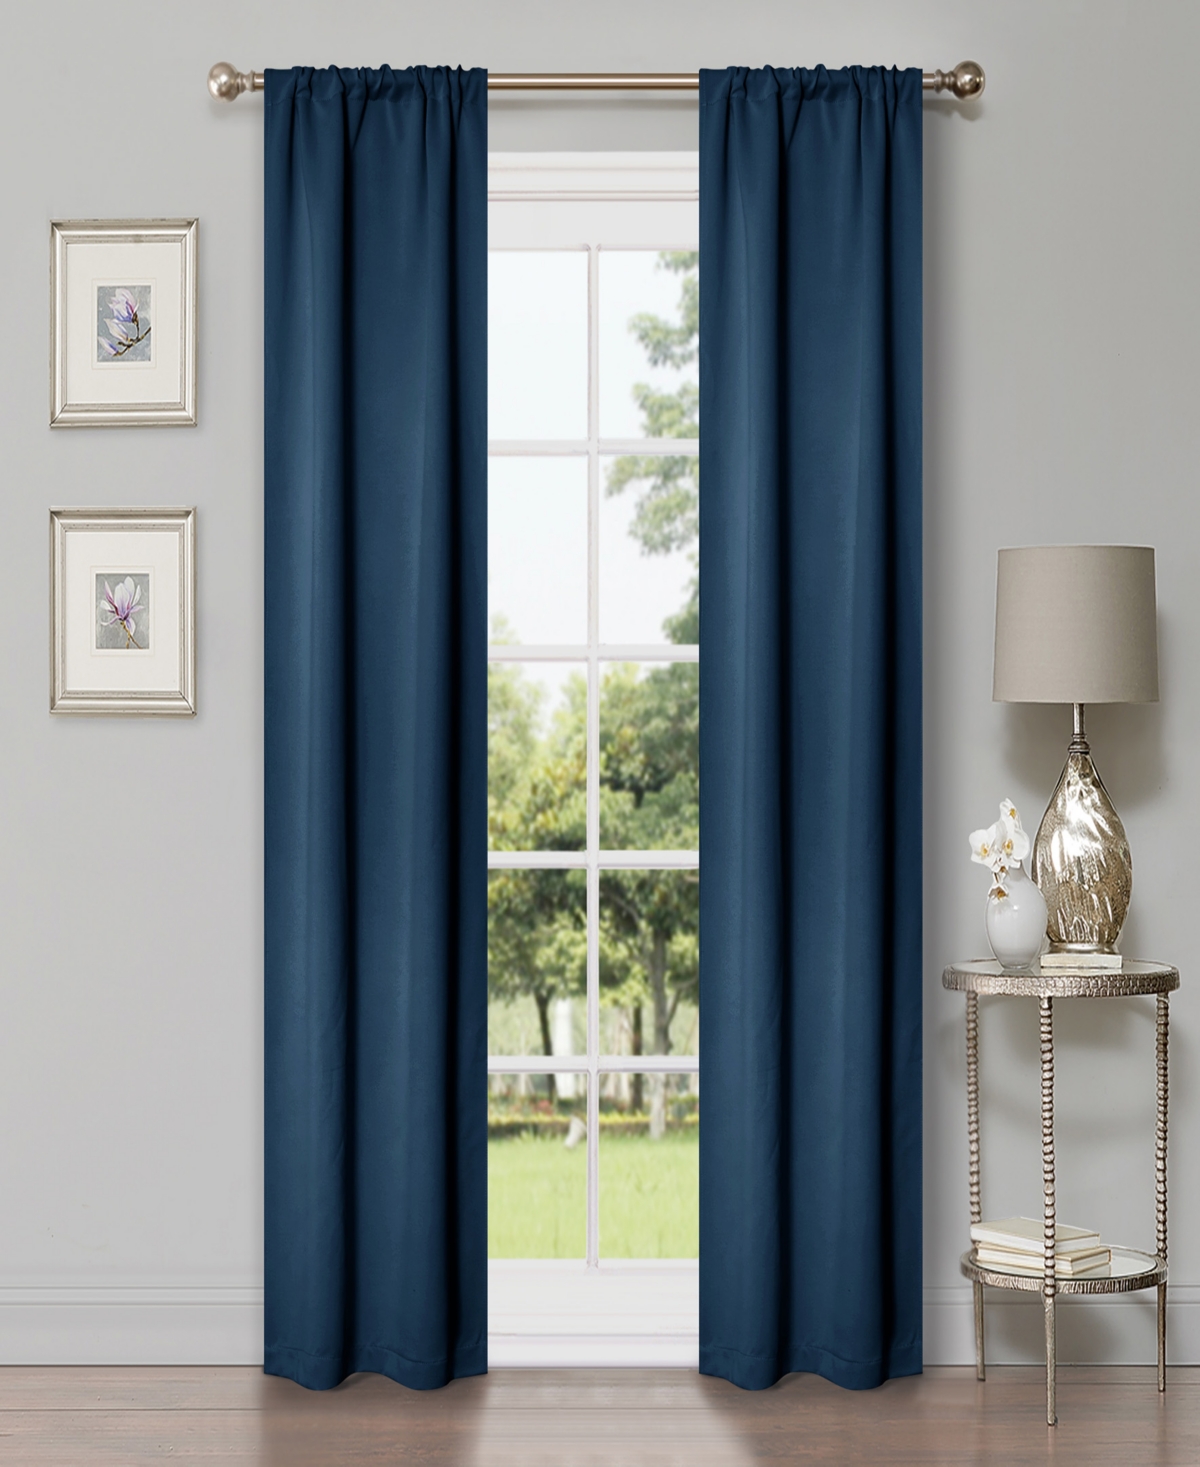 Solid Classic Modern Blackout Wrinkle Resistant Room Darkening 8-Piece Curtain Set with Rod Pocket, 26" X 84" - Navy blue